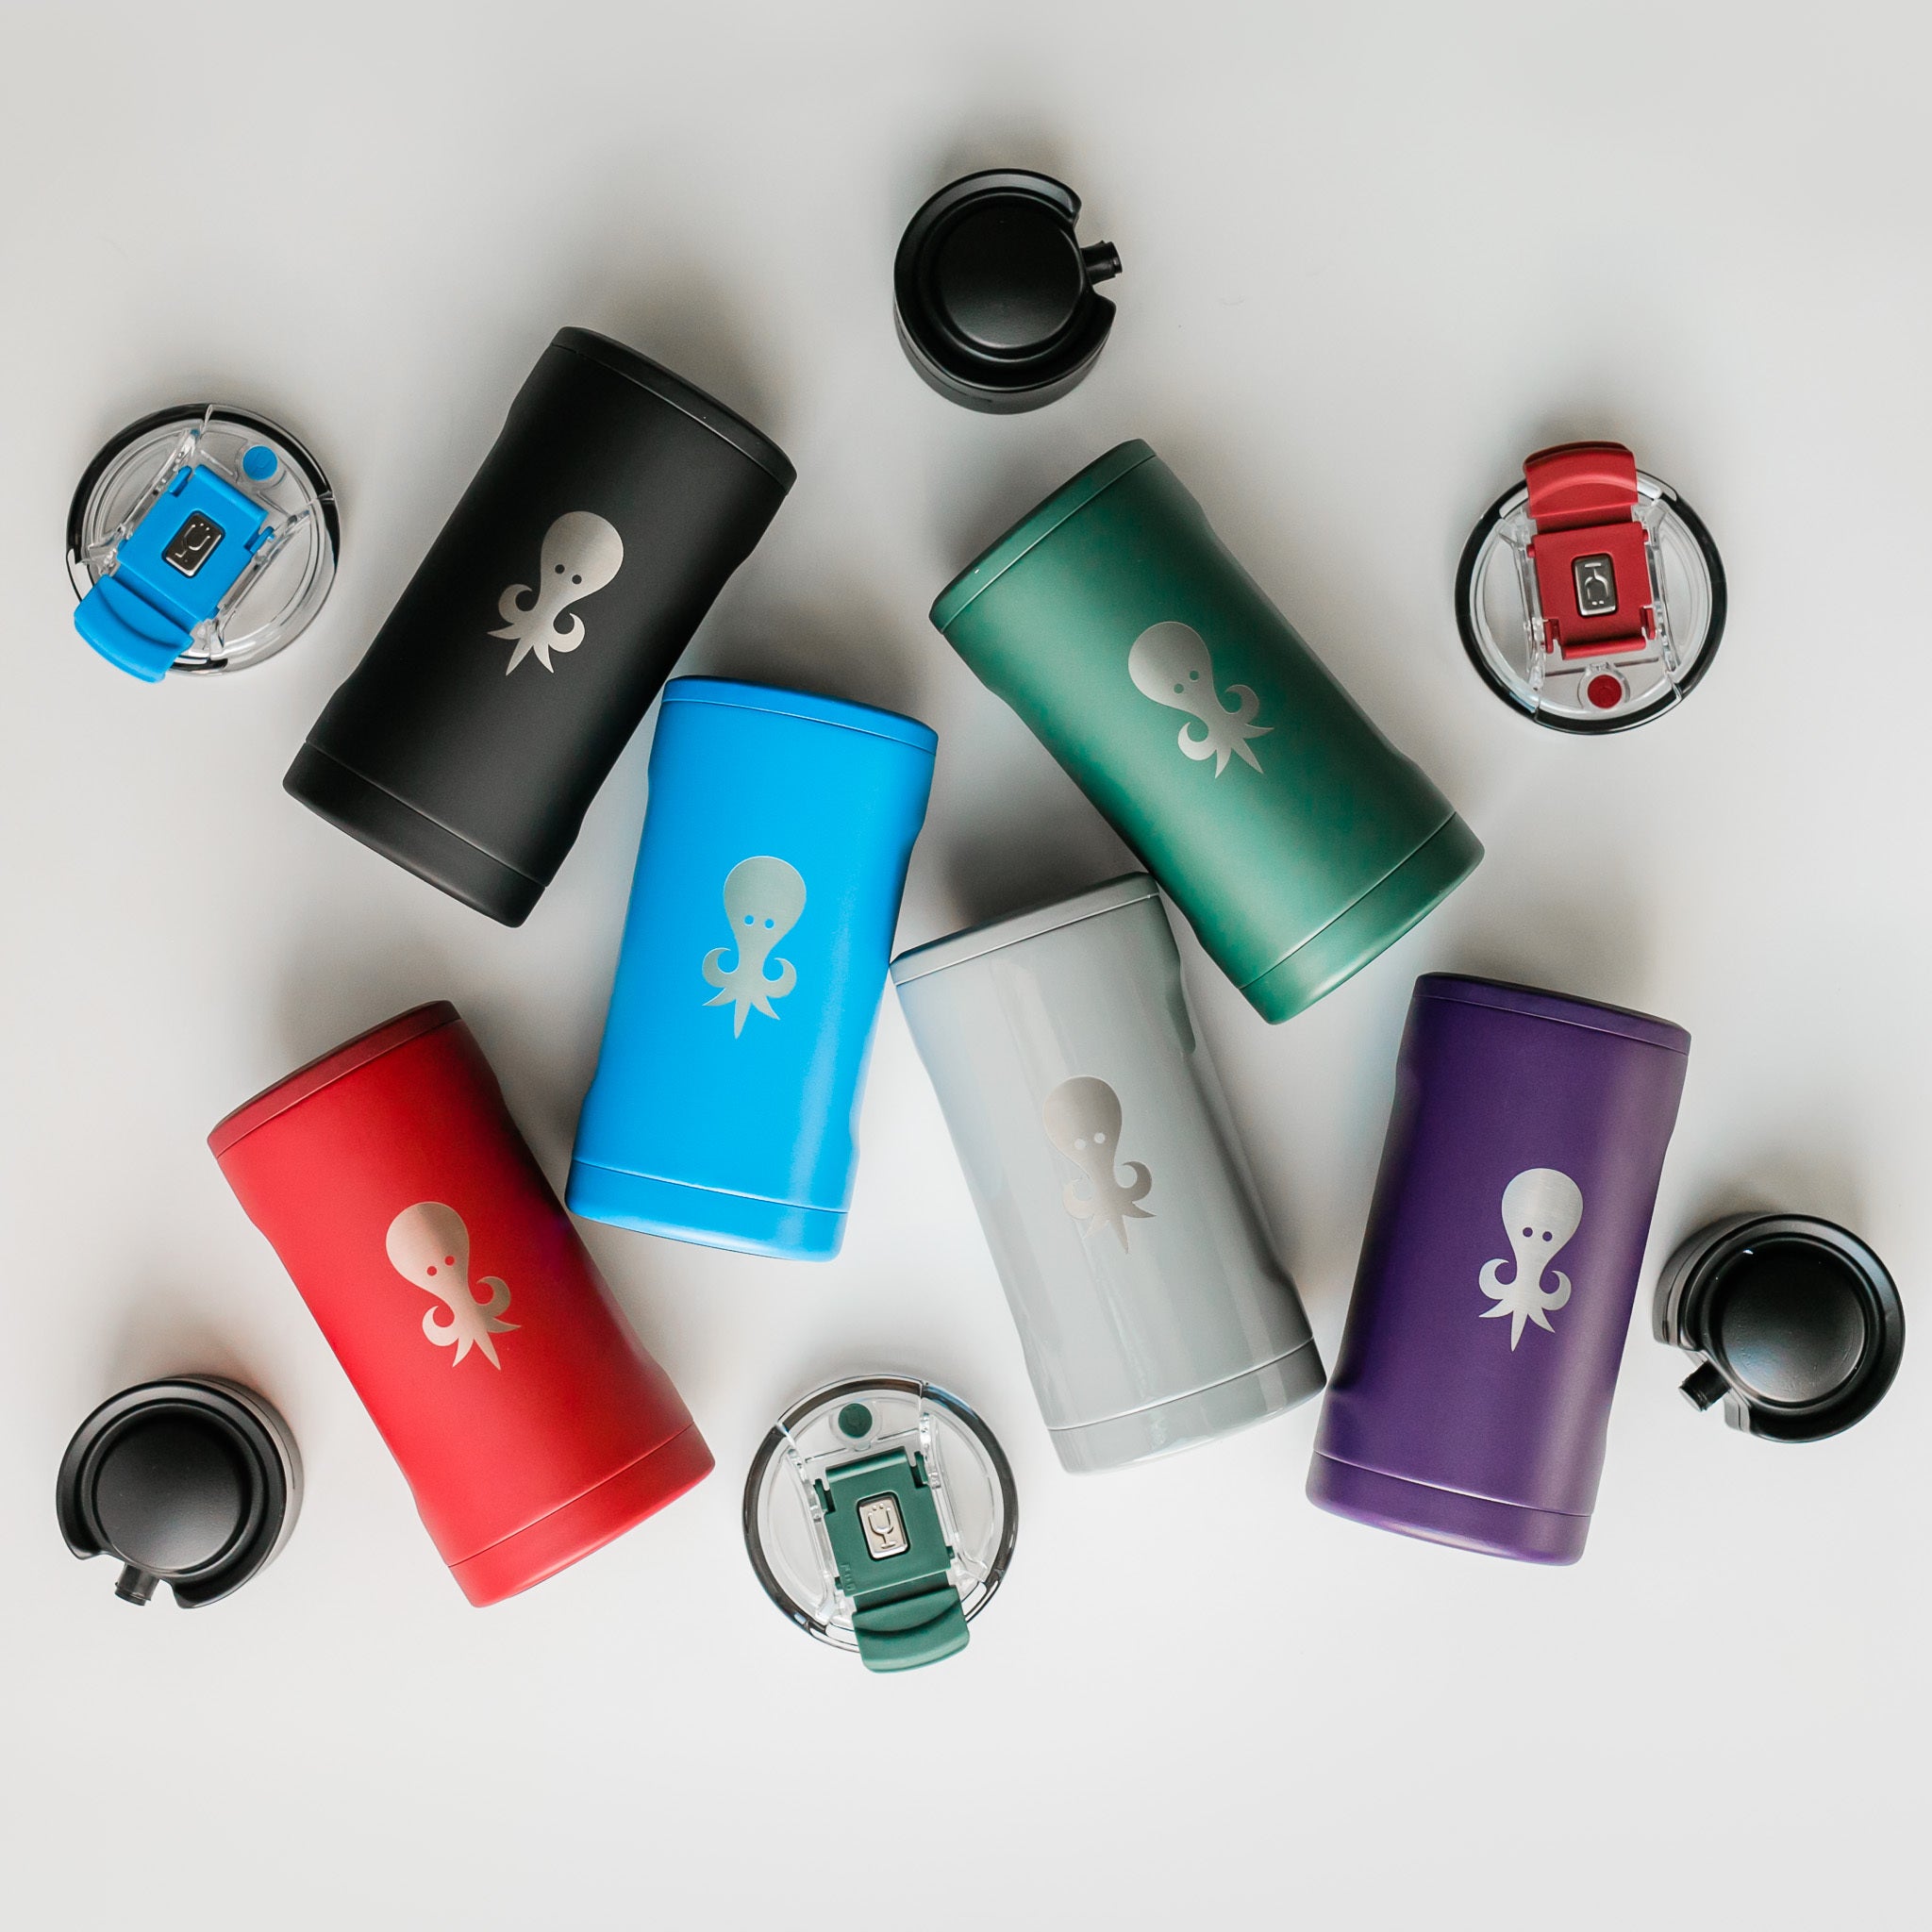 Brumate Slim Can Cooler – Andrea's Lifestyle & Gifts